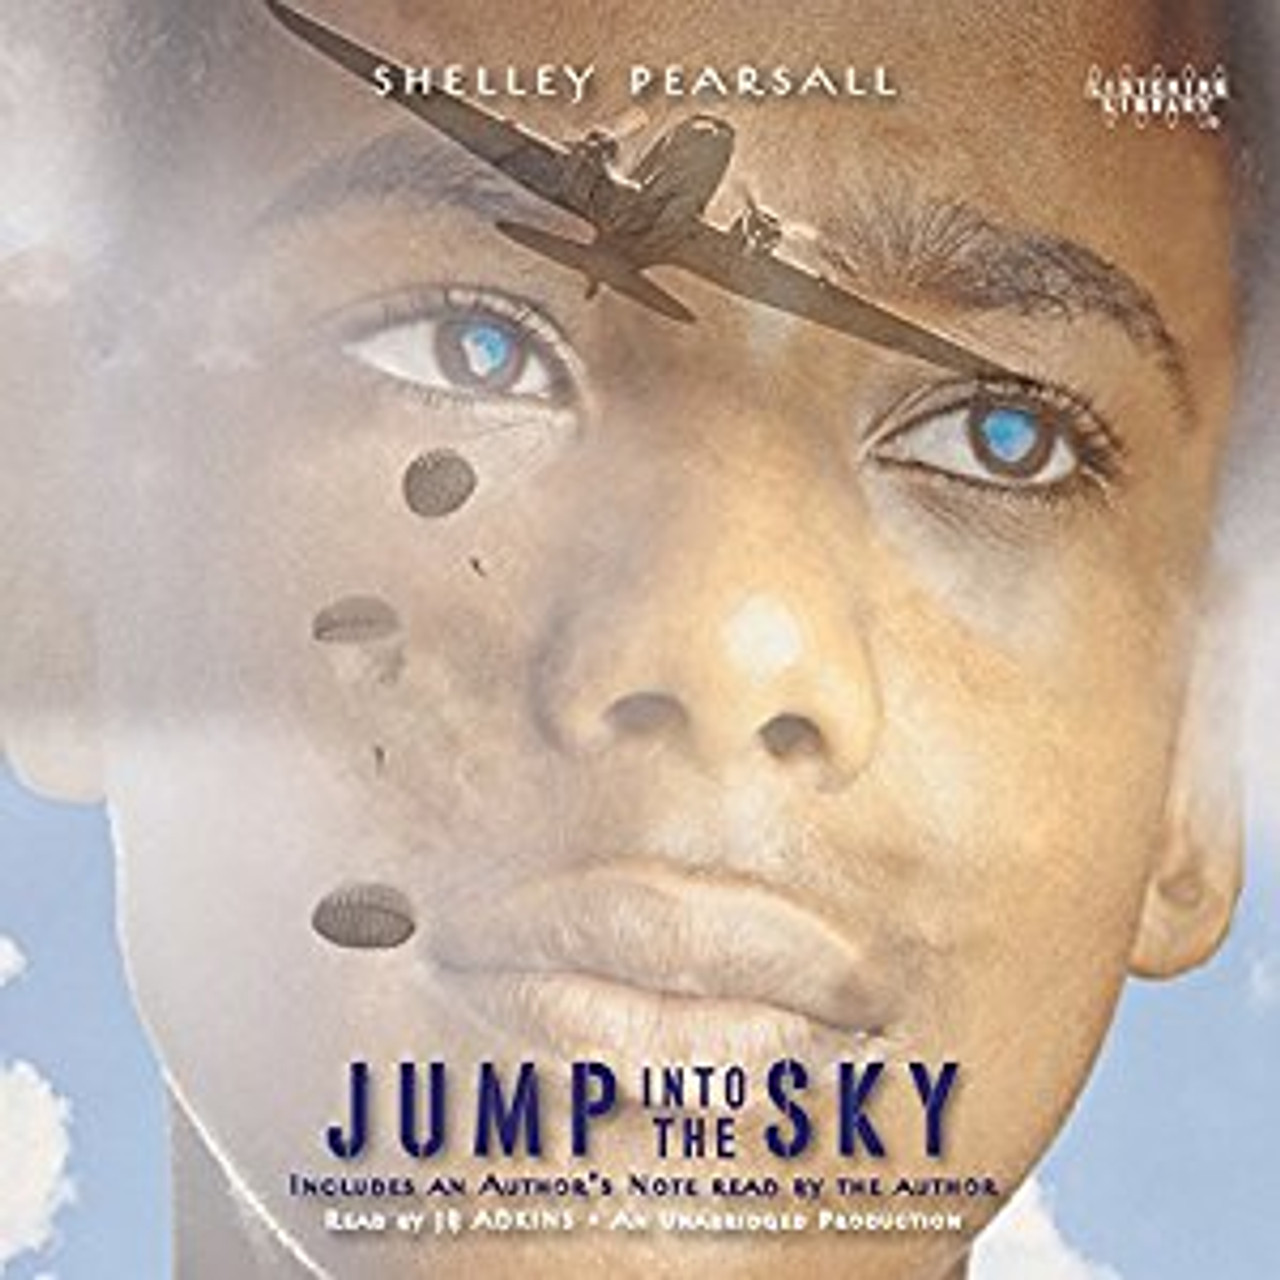 Jump Into the Sky by Shelley Pearsall